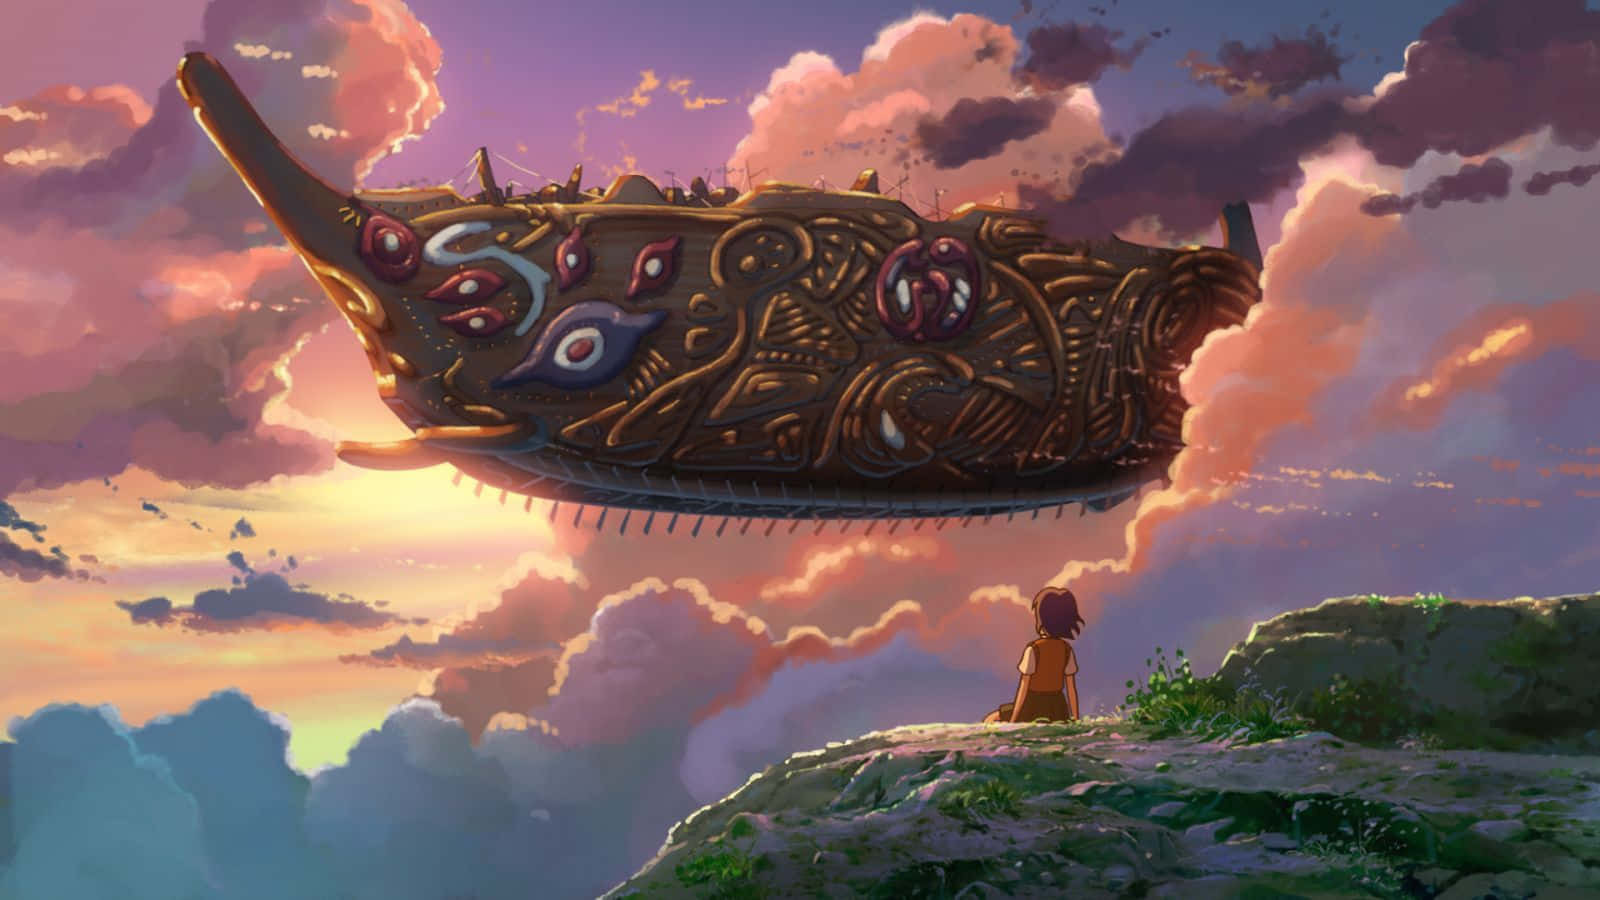 Tales From Earthsea Magical Encounter Wallpaper